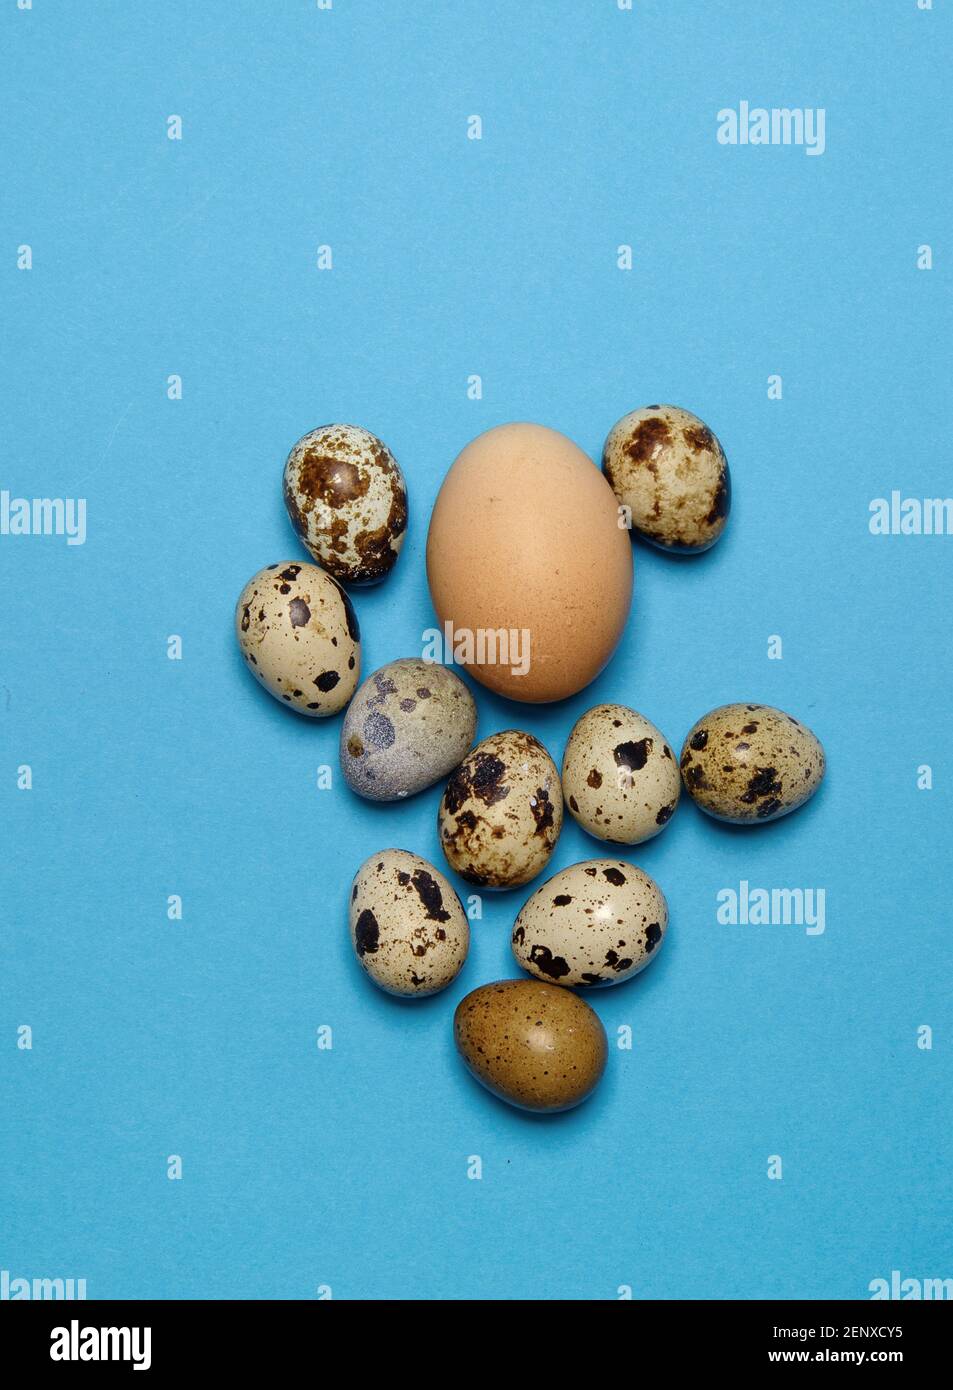 chicken egg on a blue background and around a few small quail eggs Stock Photo